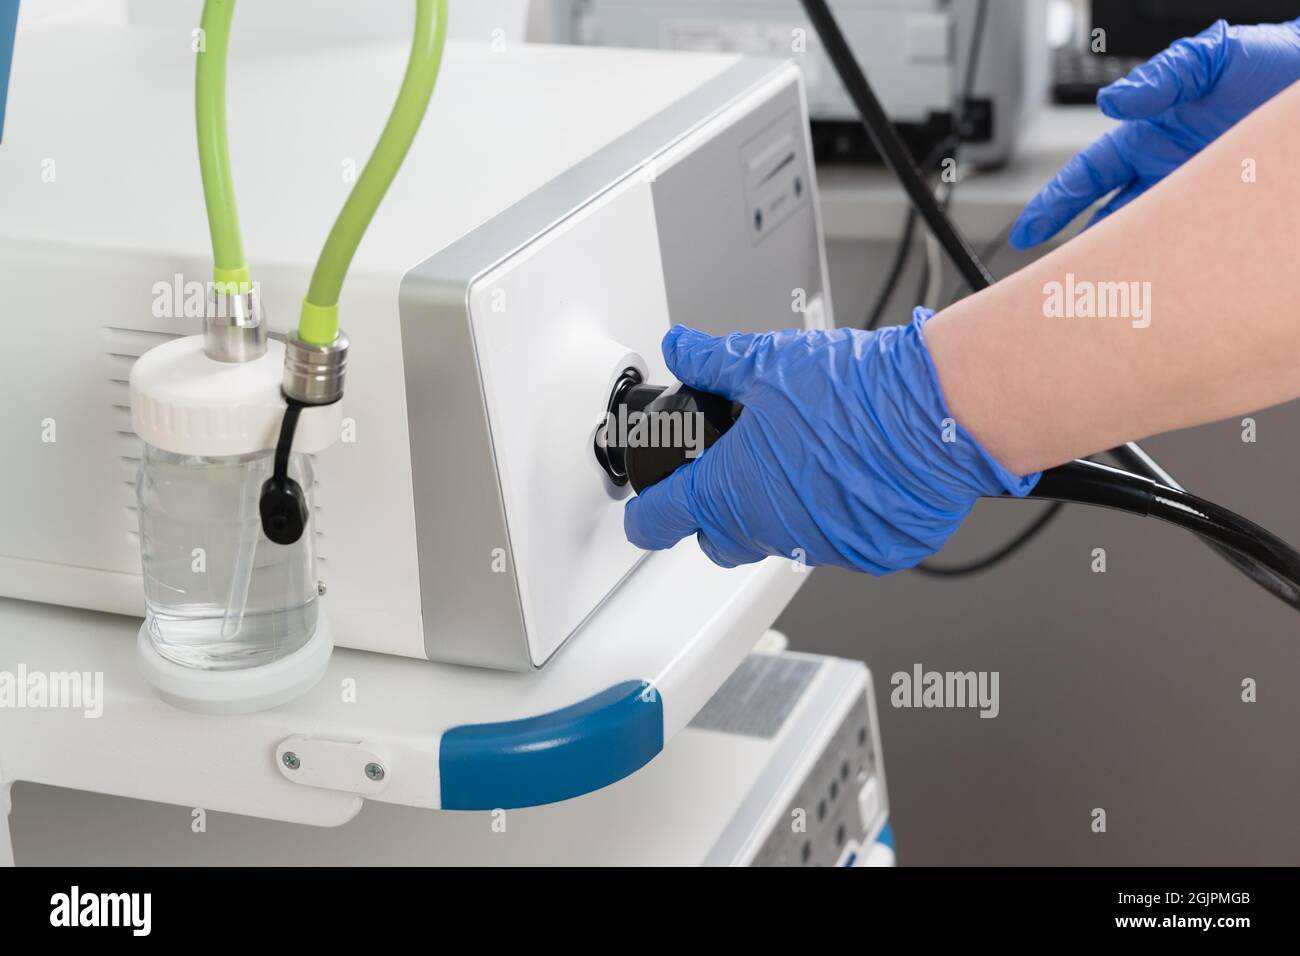 Preparation of equipment for the medical examination of video gastroscopy. The doctors hands in blue gloves connect the endoscope and other equipment Stock Photo